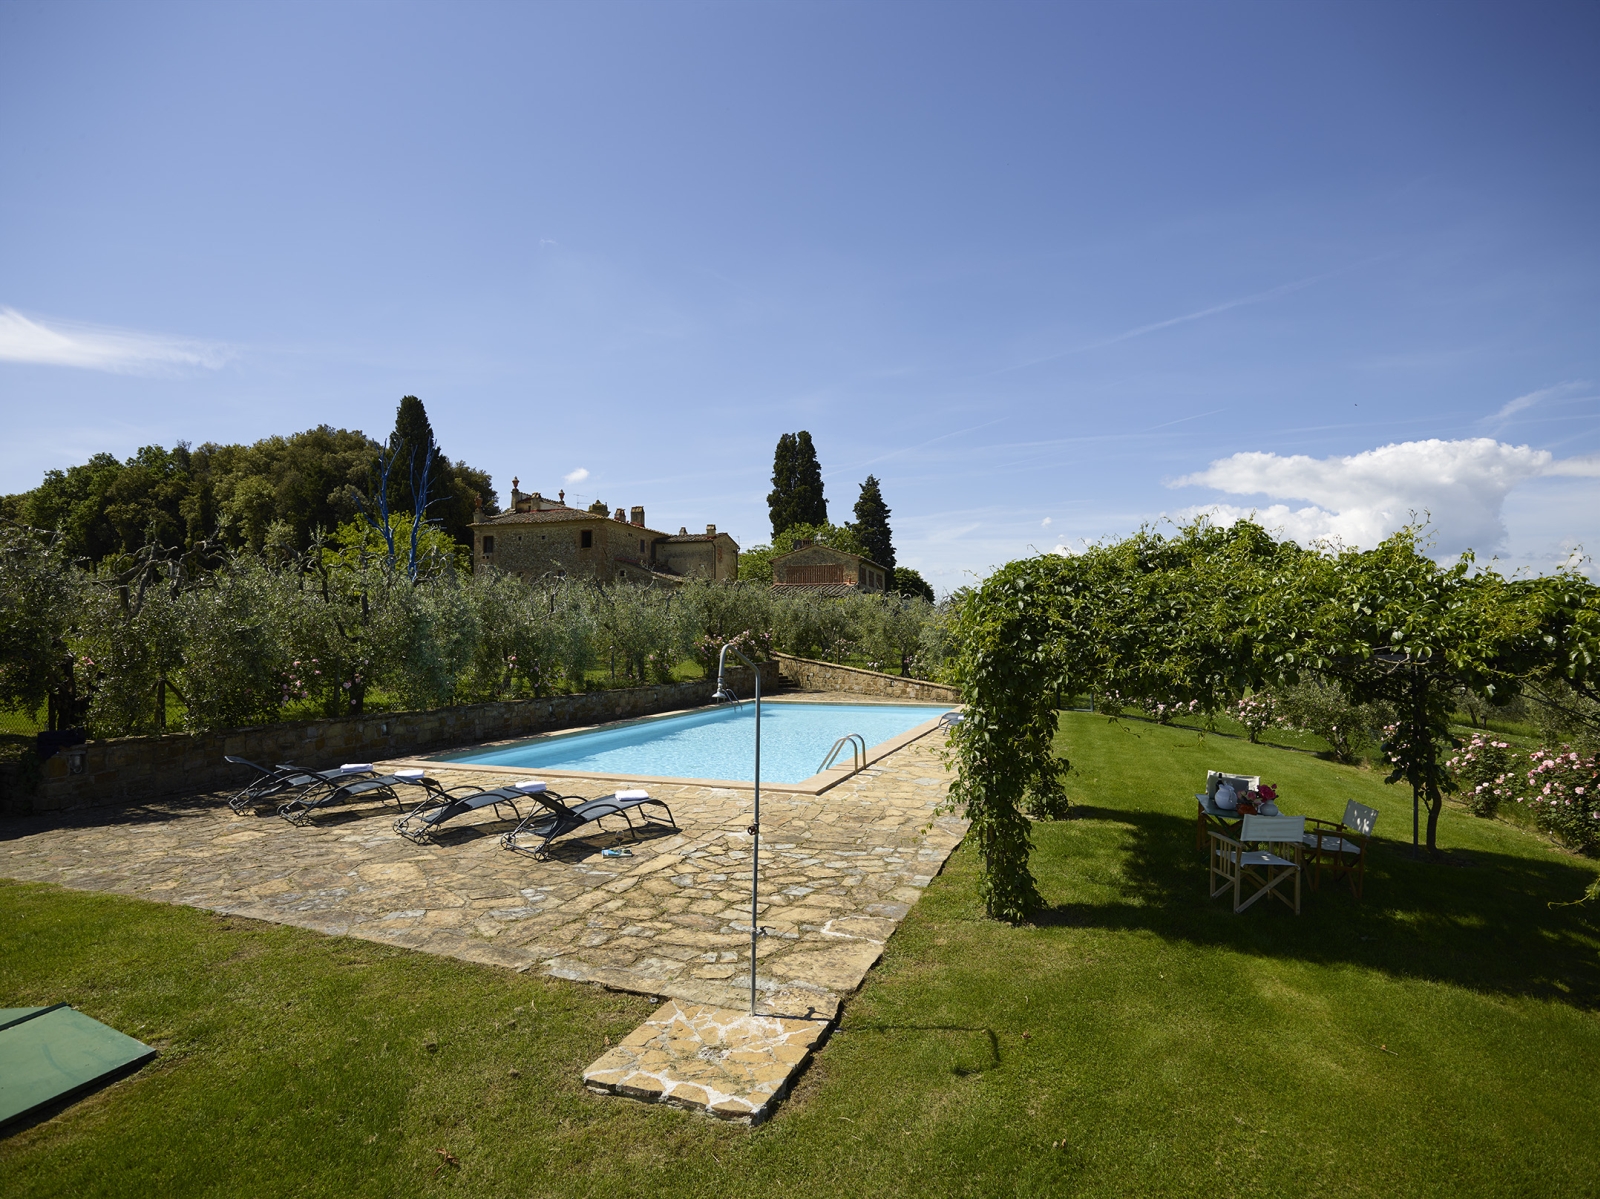 Pool, pool area and garden with sun loungers, shower, chairs and arbour at Villa La Castellana in Tuscany, Italy